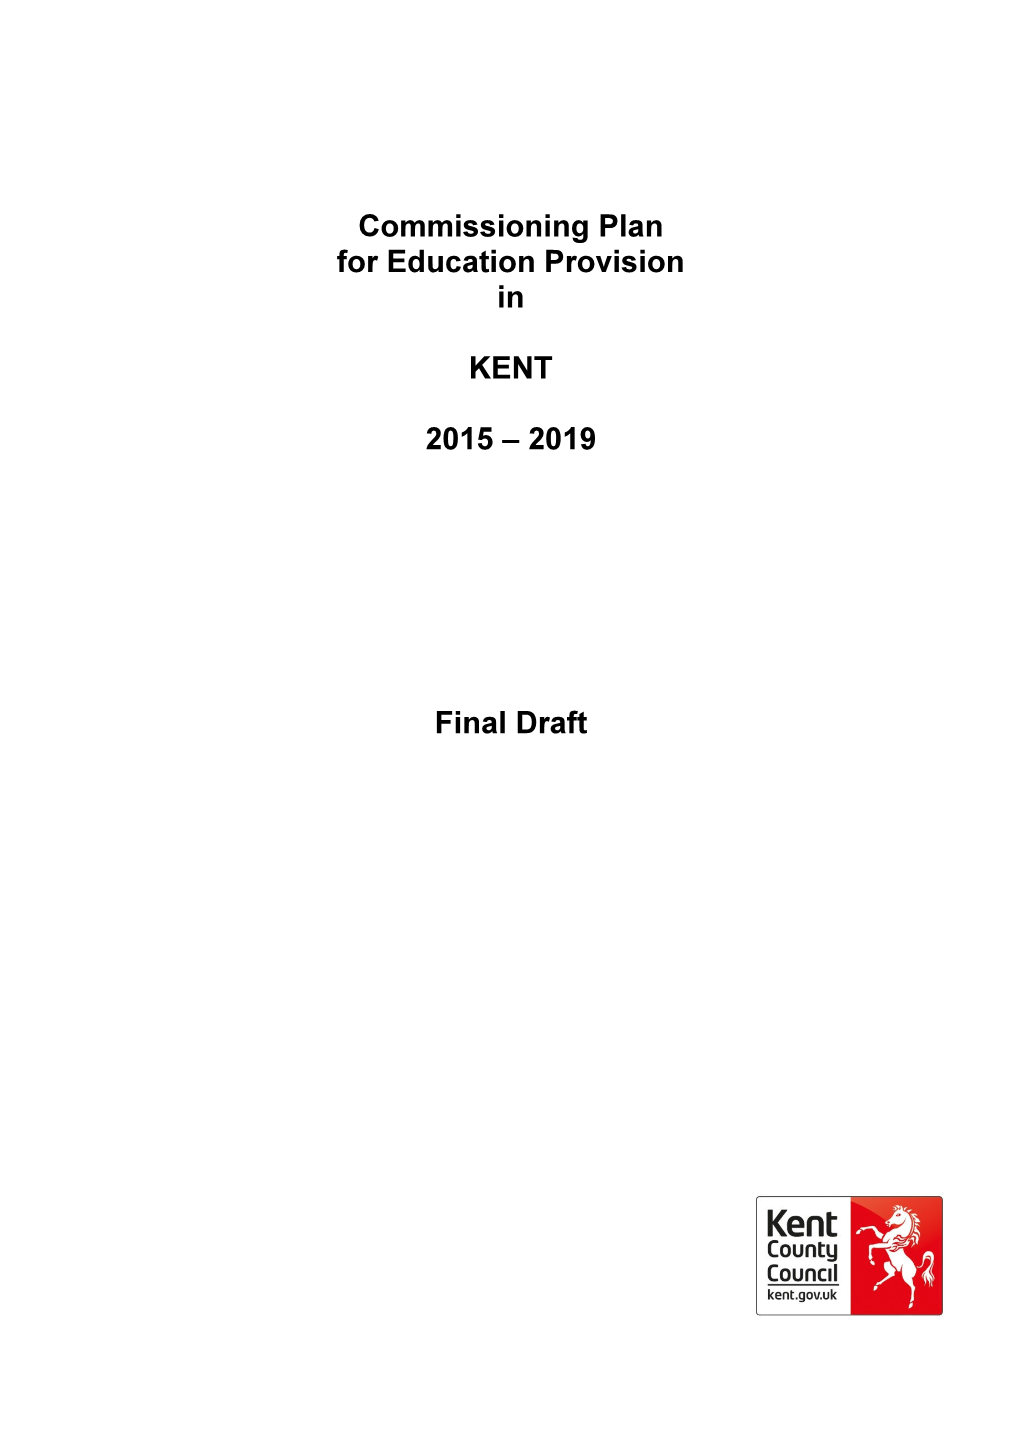 Commissioning Plan for Education Provision in KENT 2015 – 2019